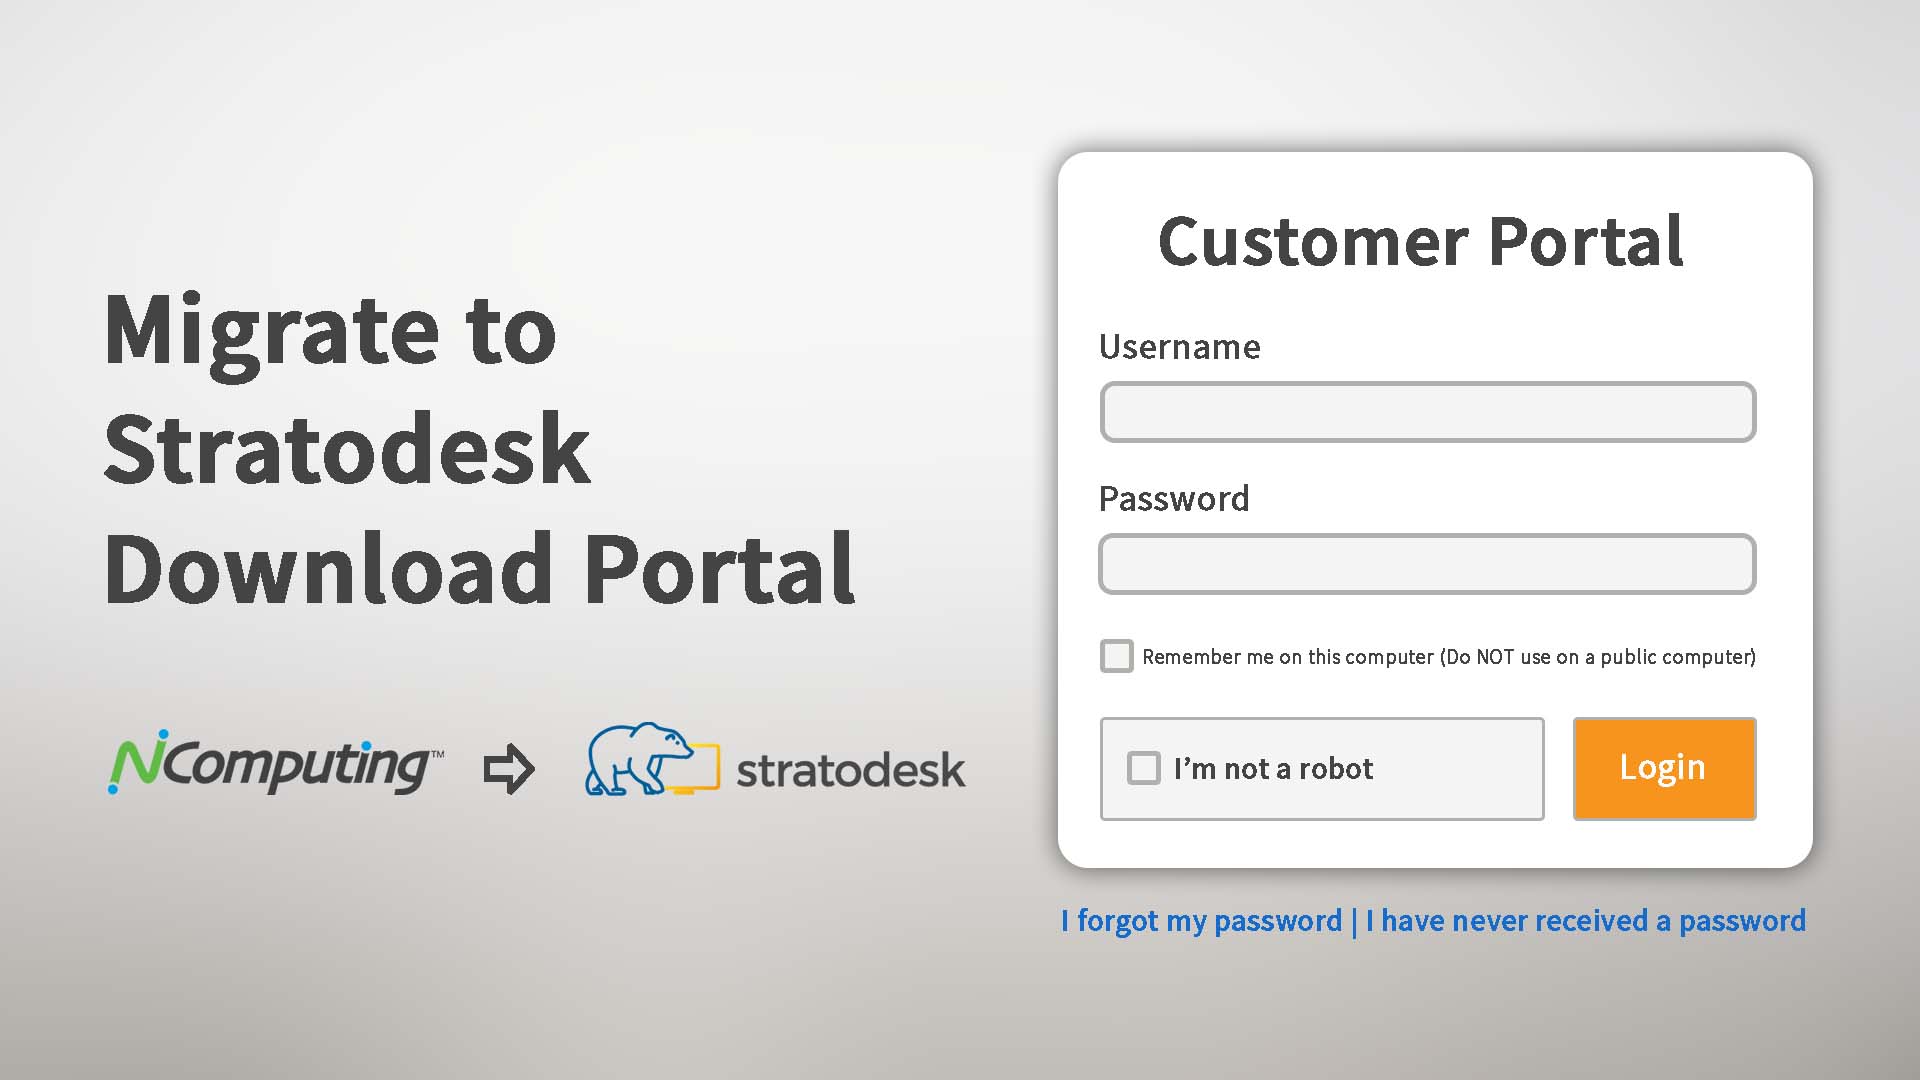 Siign in to Stratodesk Download portal with Ncomputing login